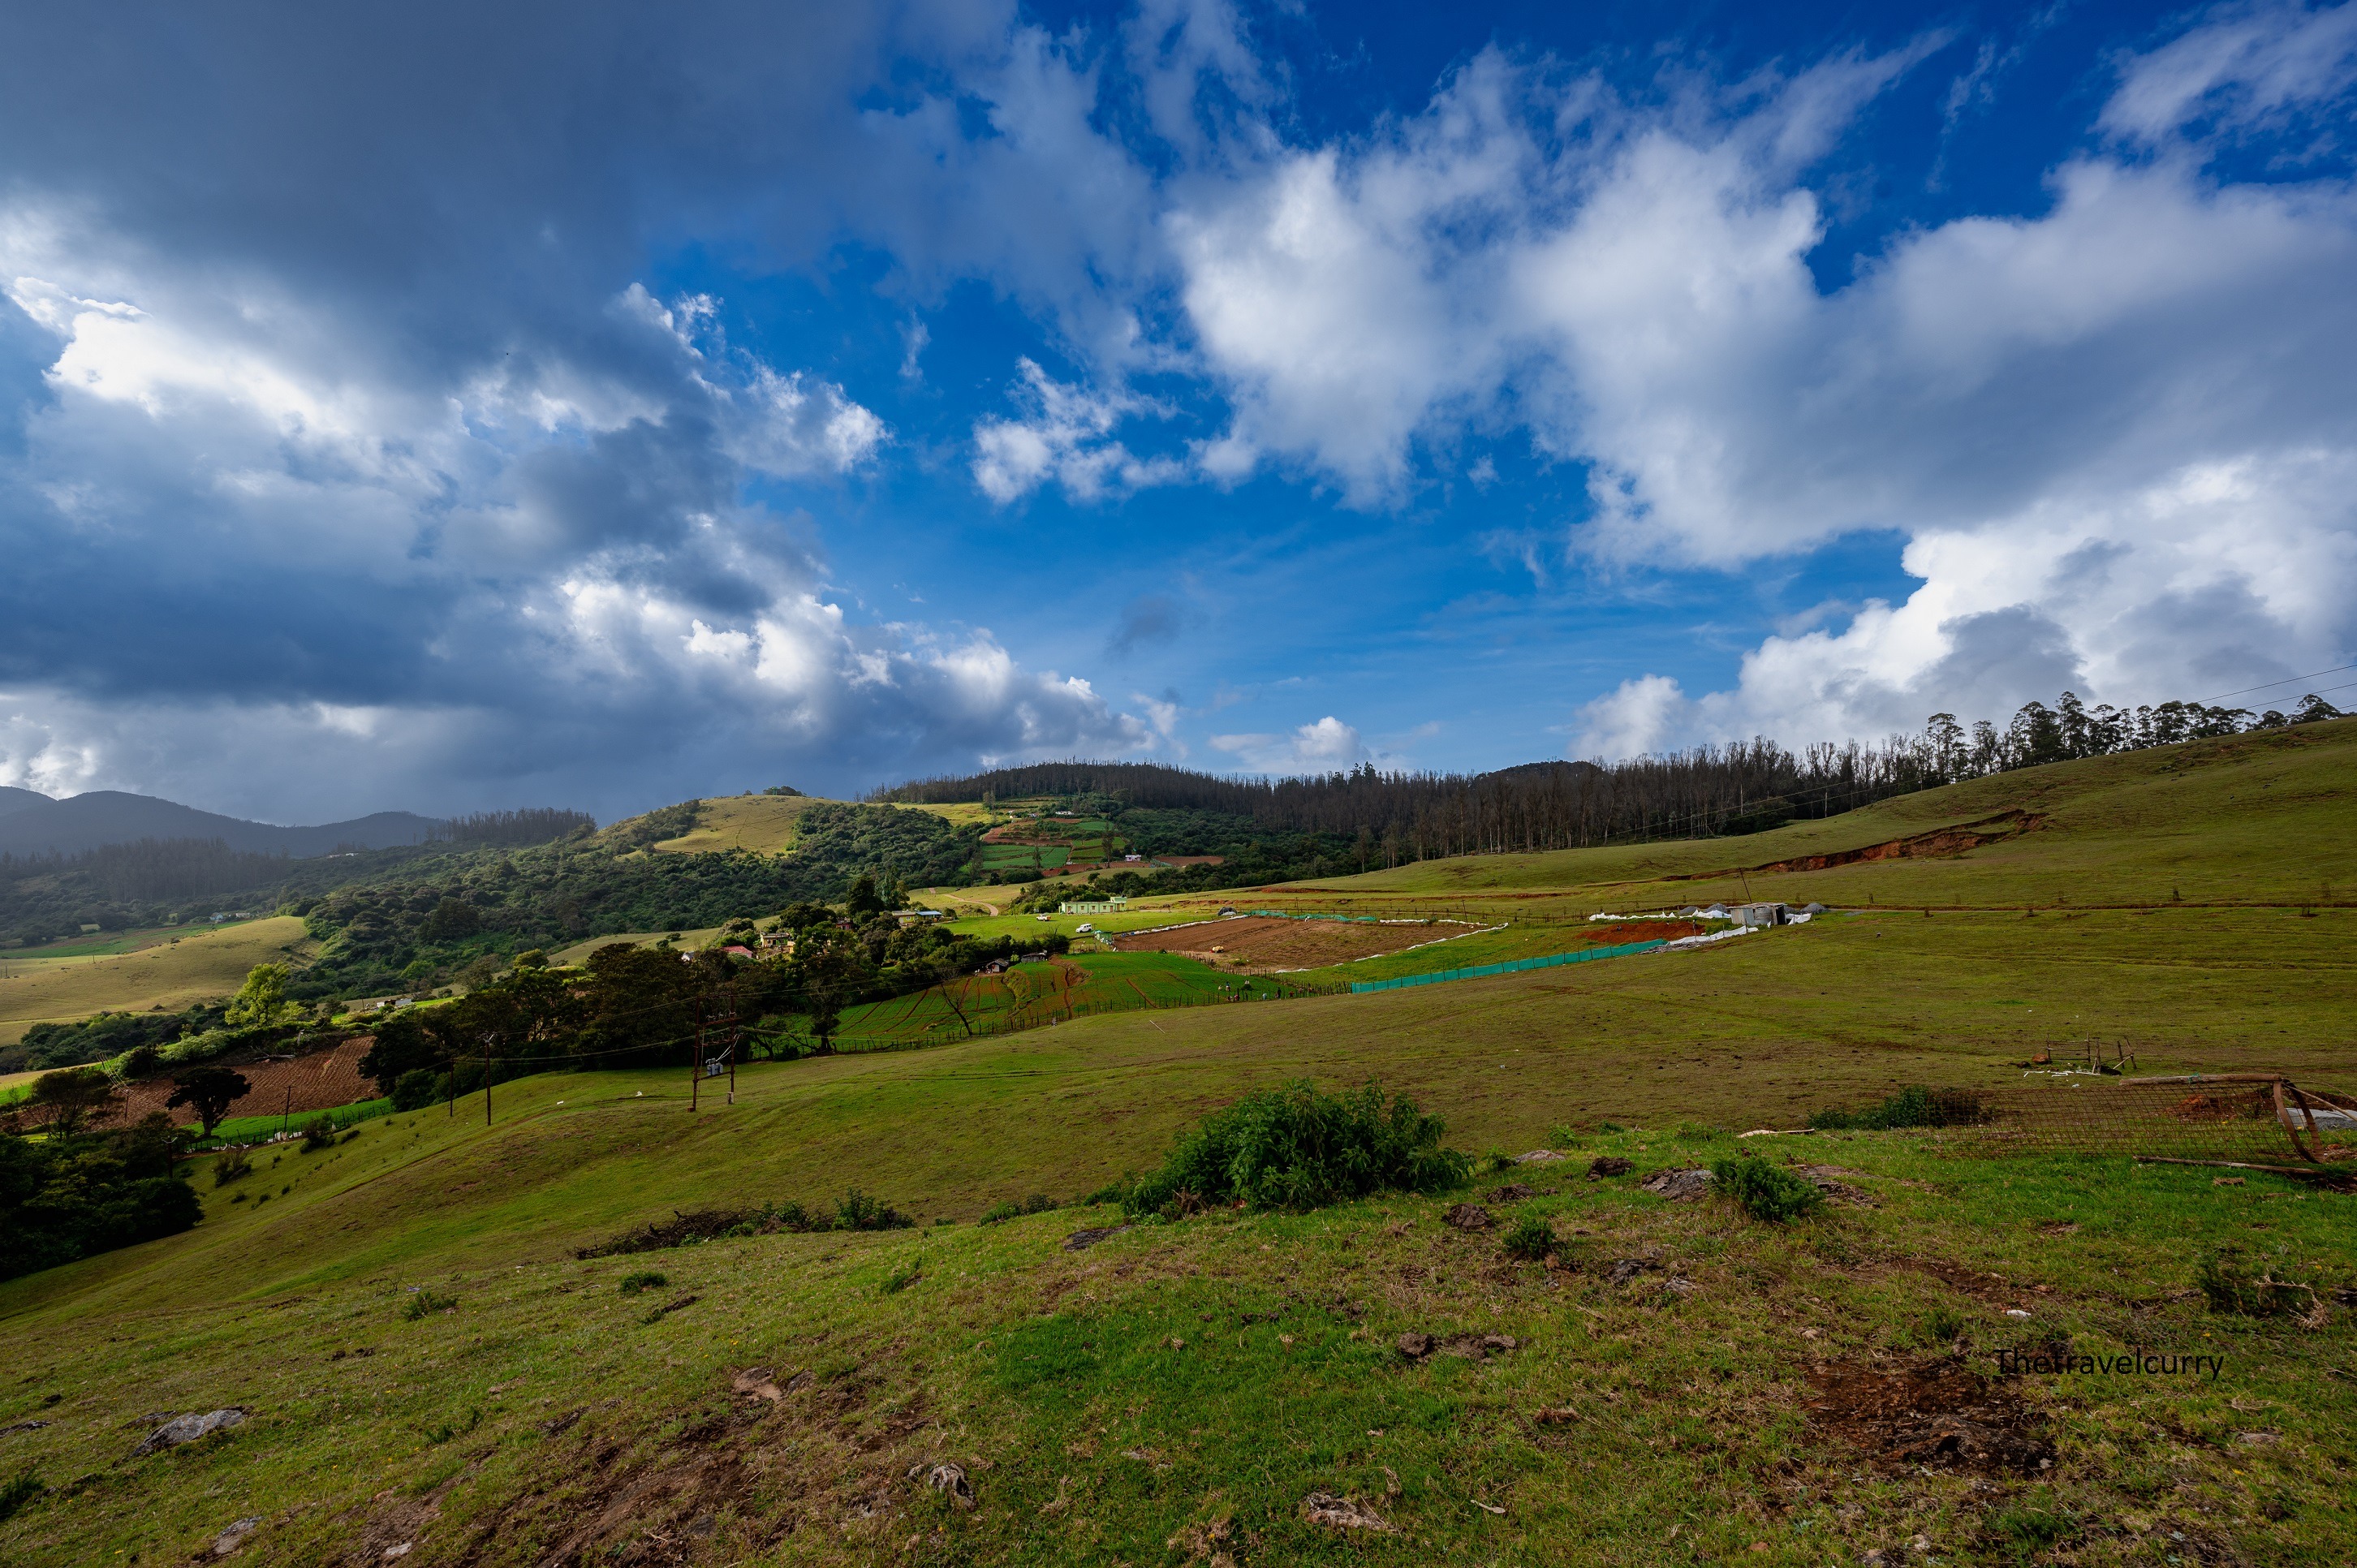 The colourful canvas of nature- Shooting Point, Ooty